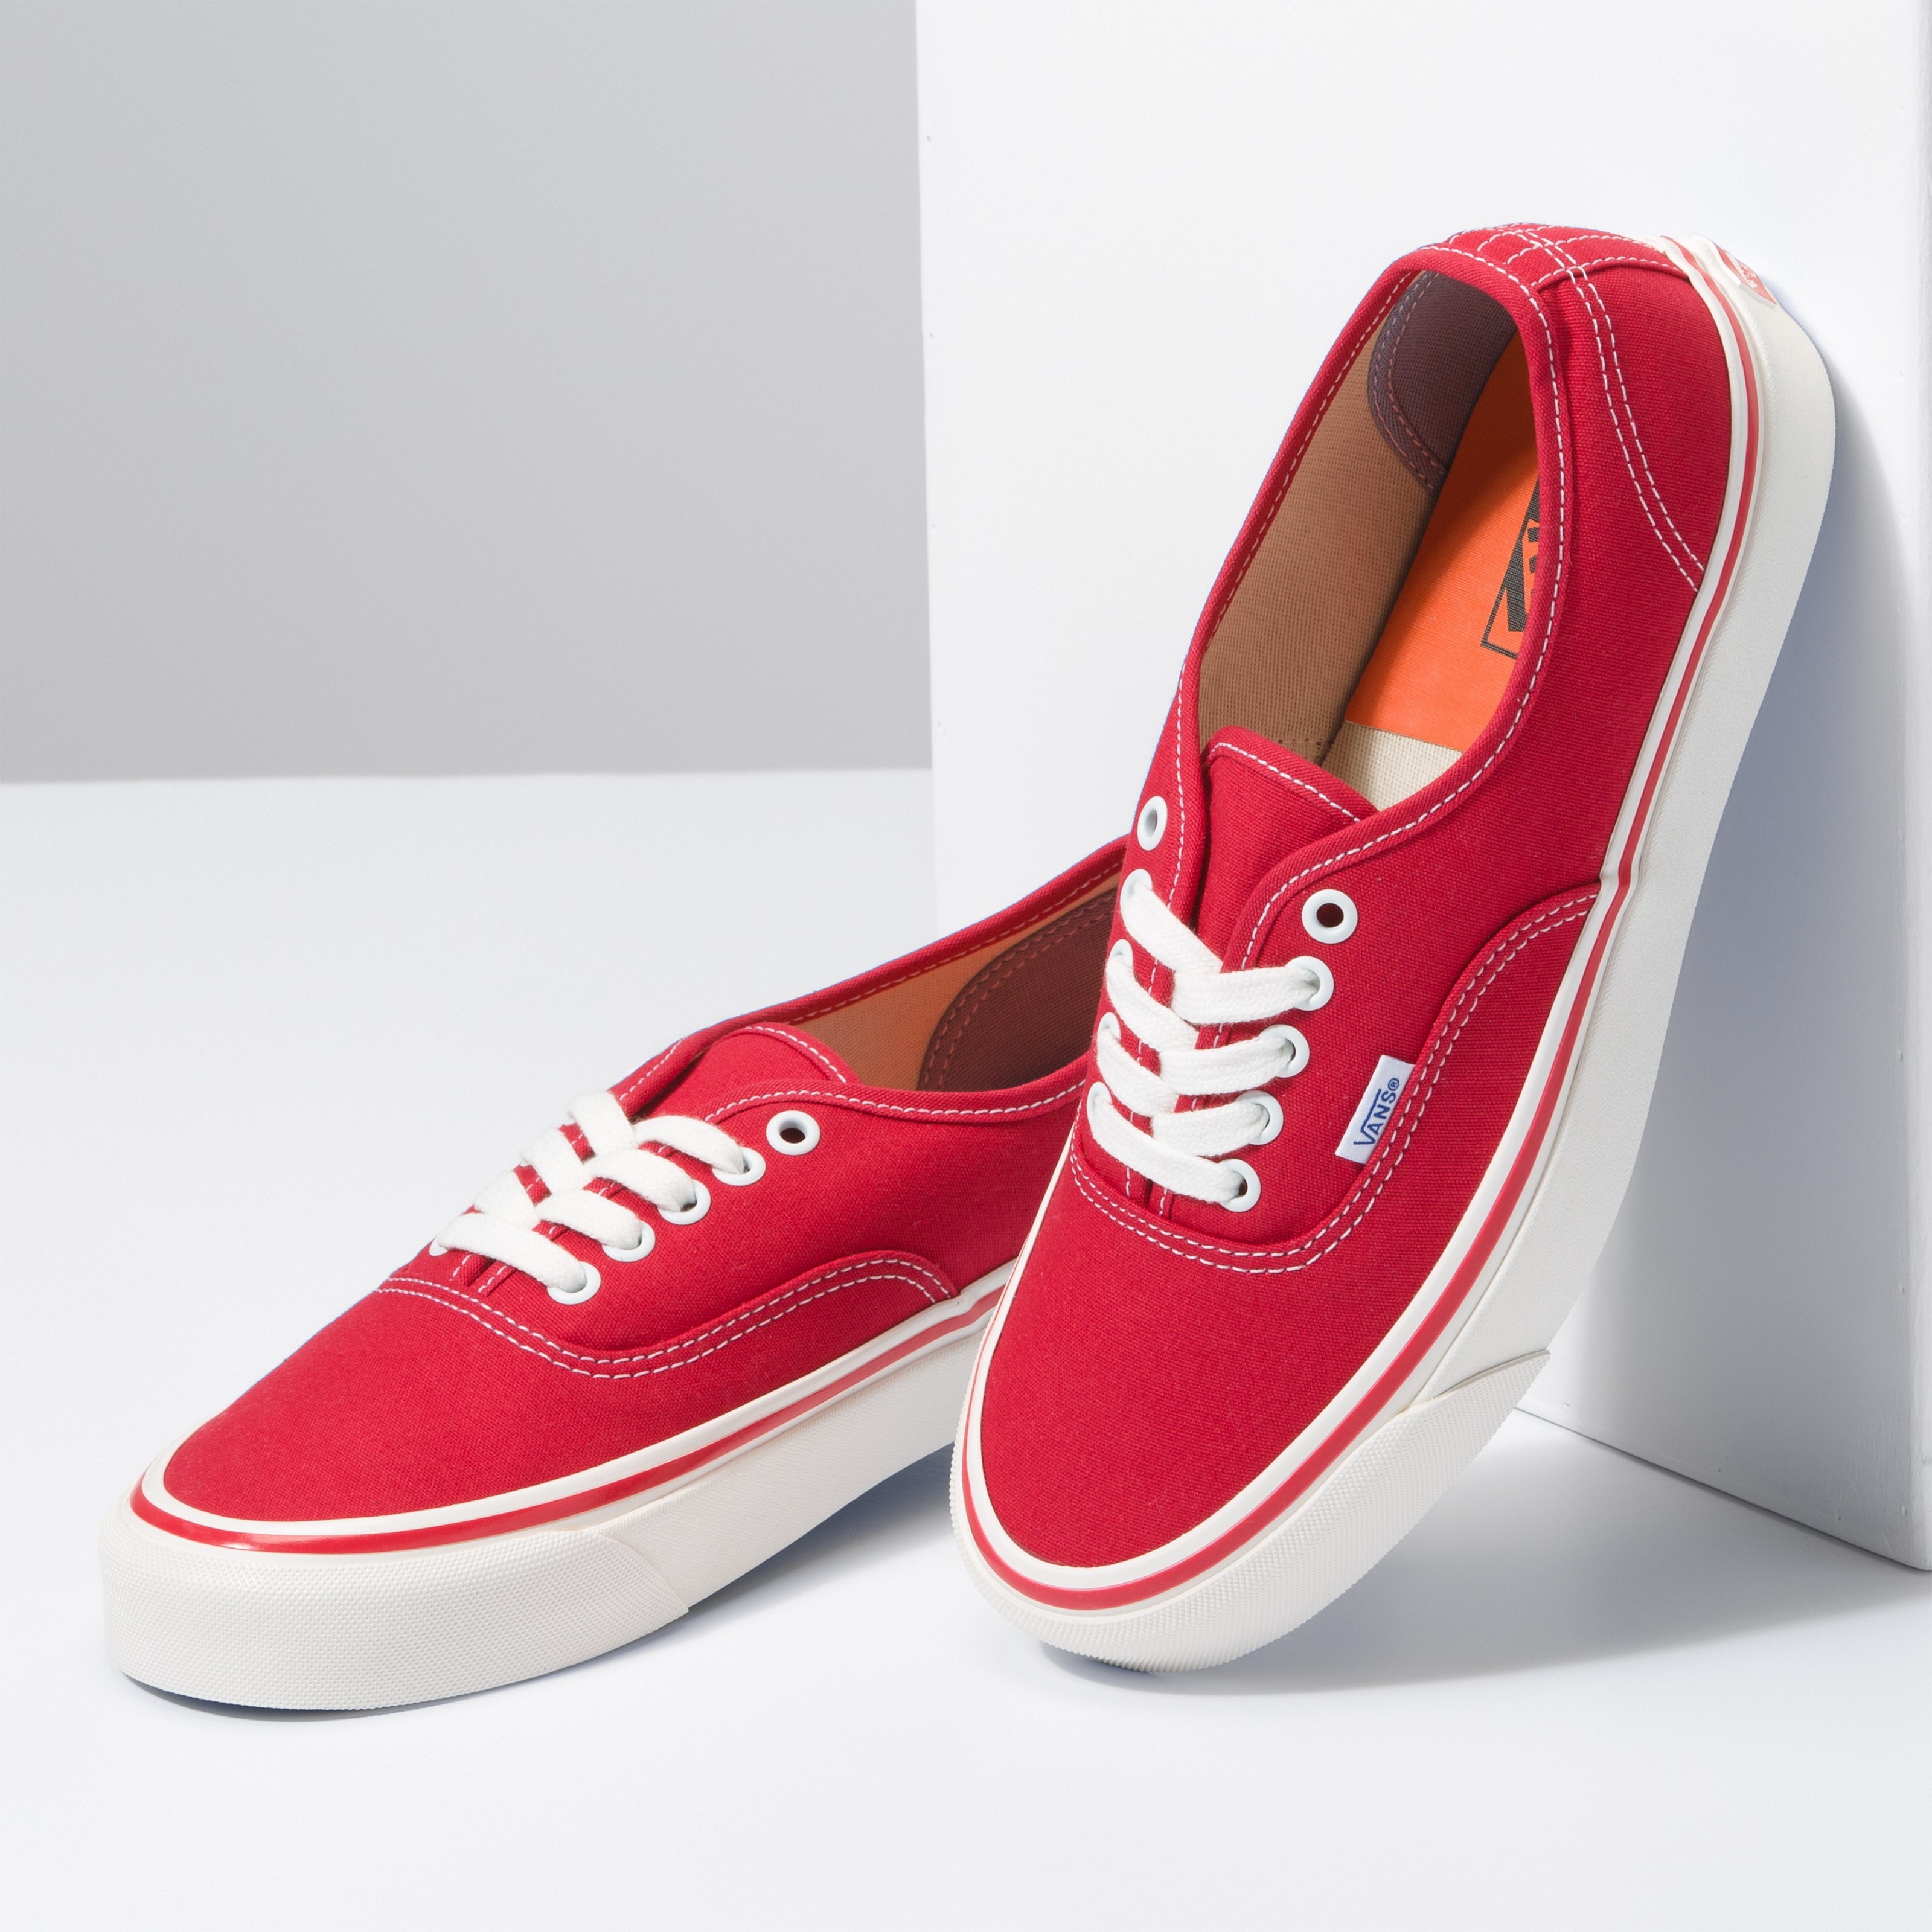 Vans Authentic 44 Deck DX Sneaker - Anaheim Factory Red | Casual